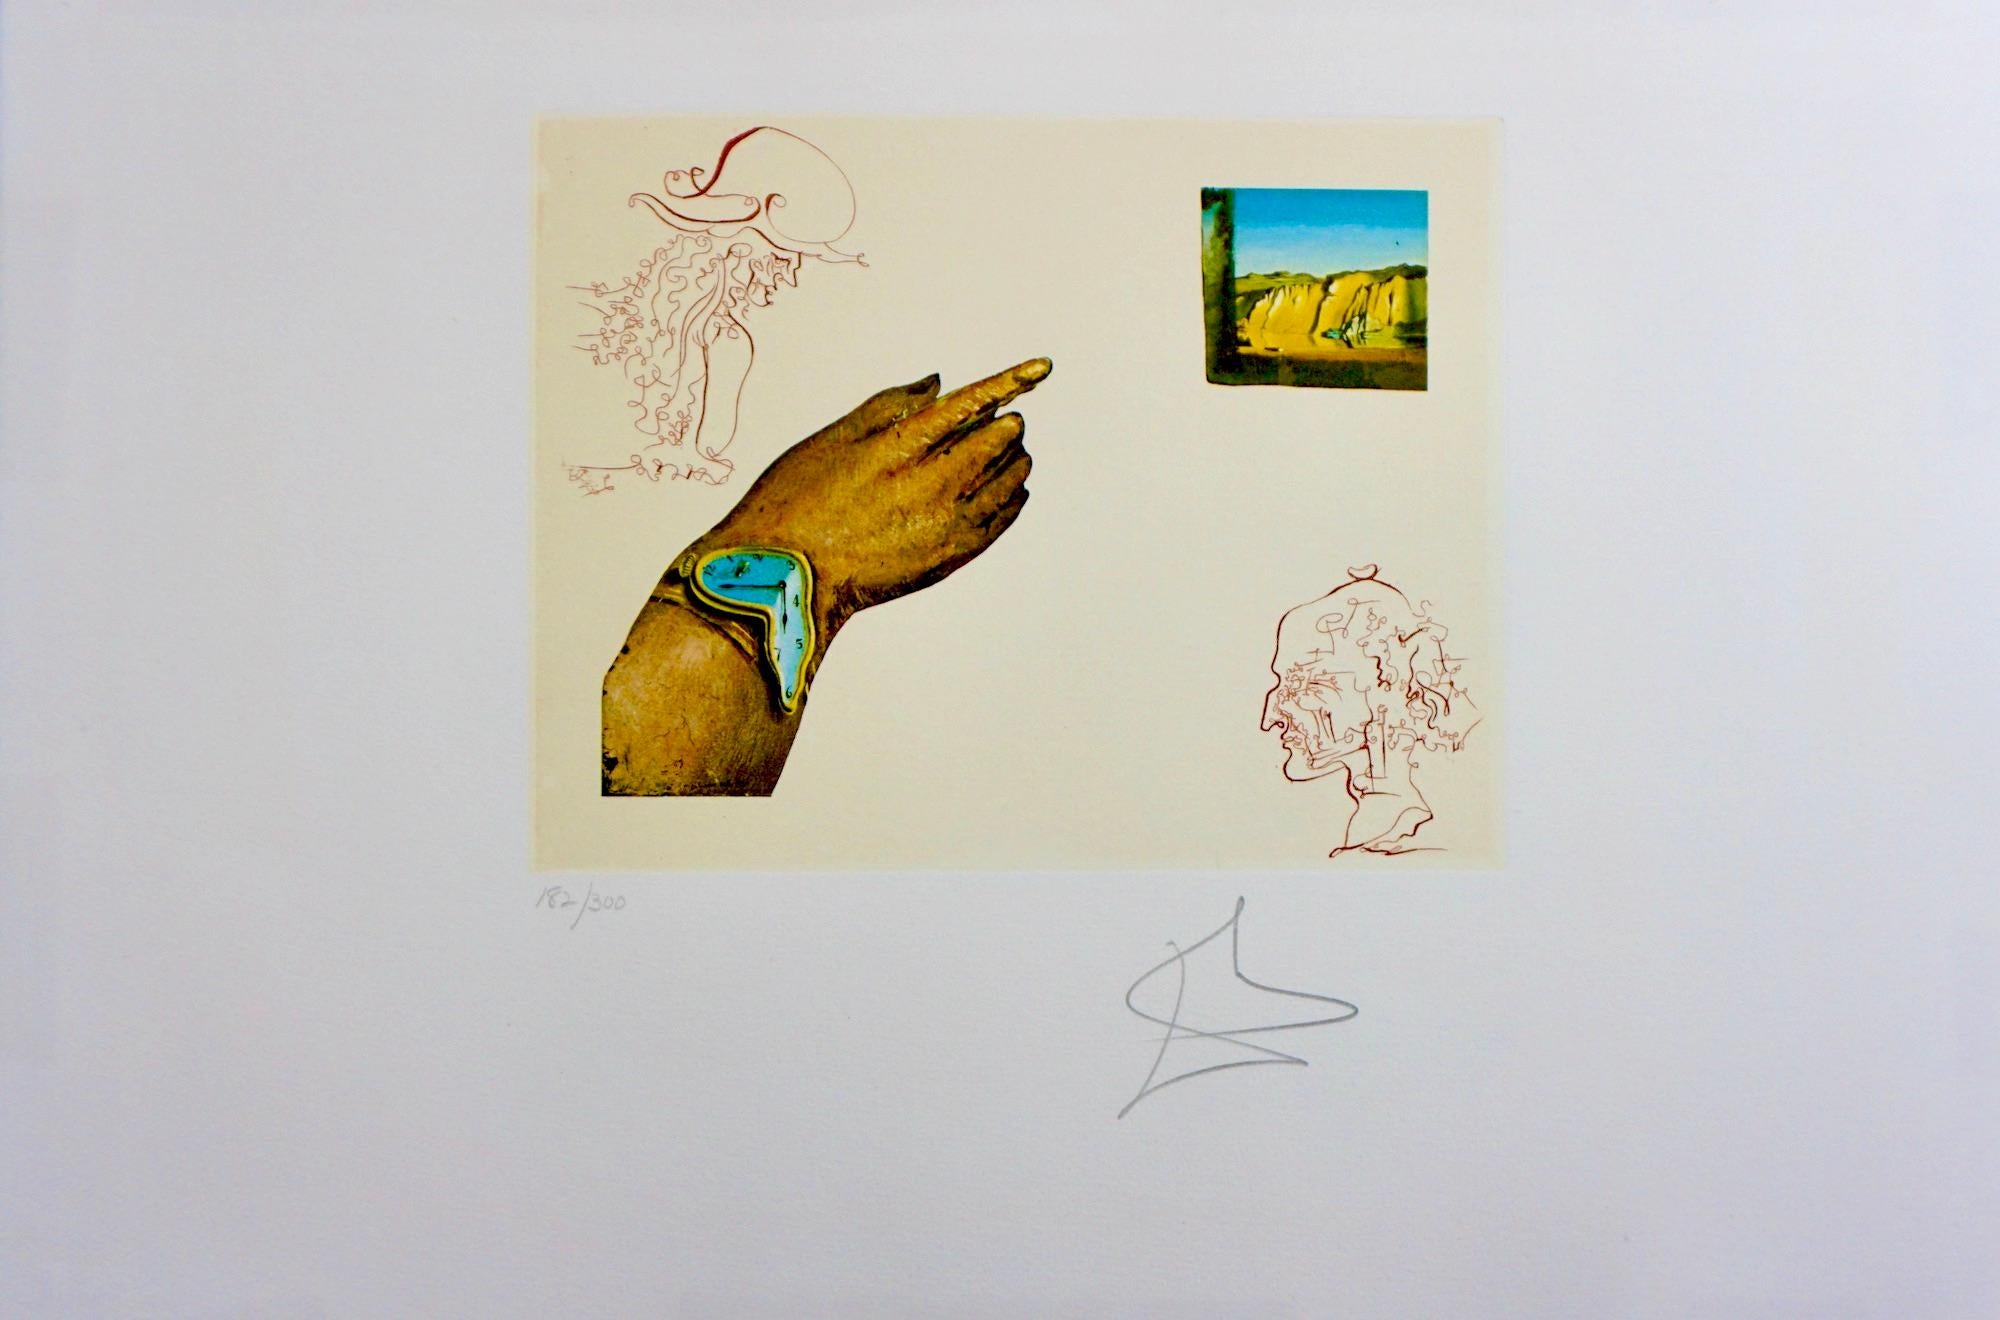 The Cycles of Life Suite  - Surrealist Print by Salvador Dalí